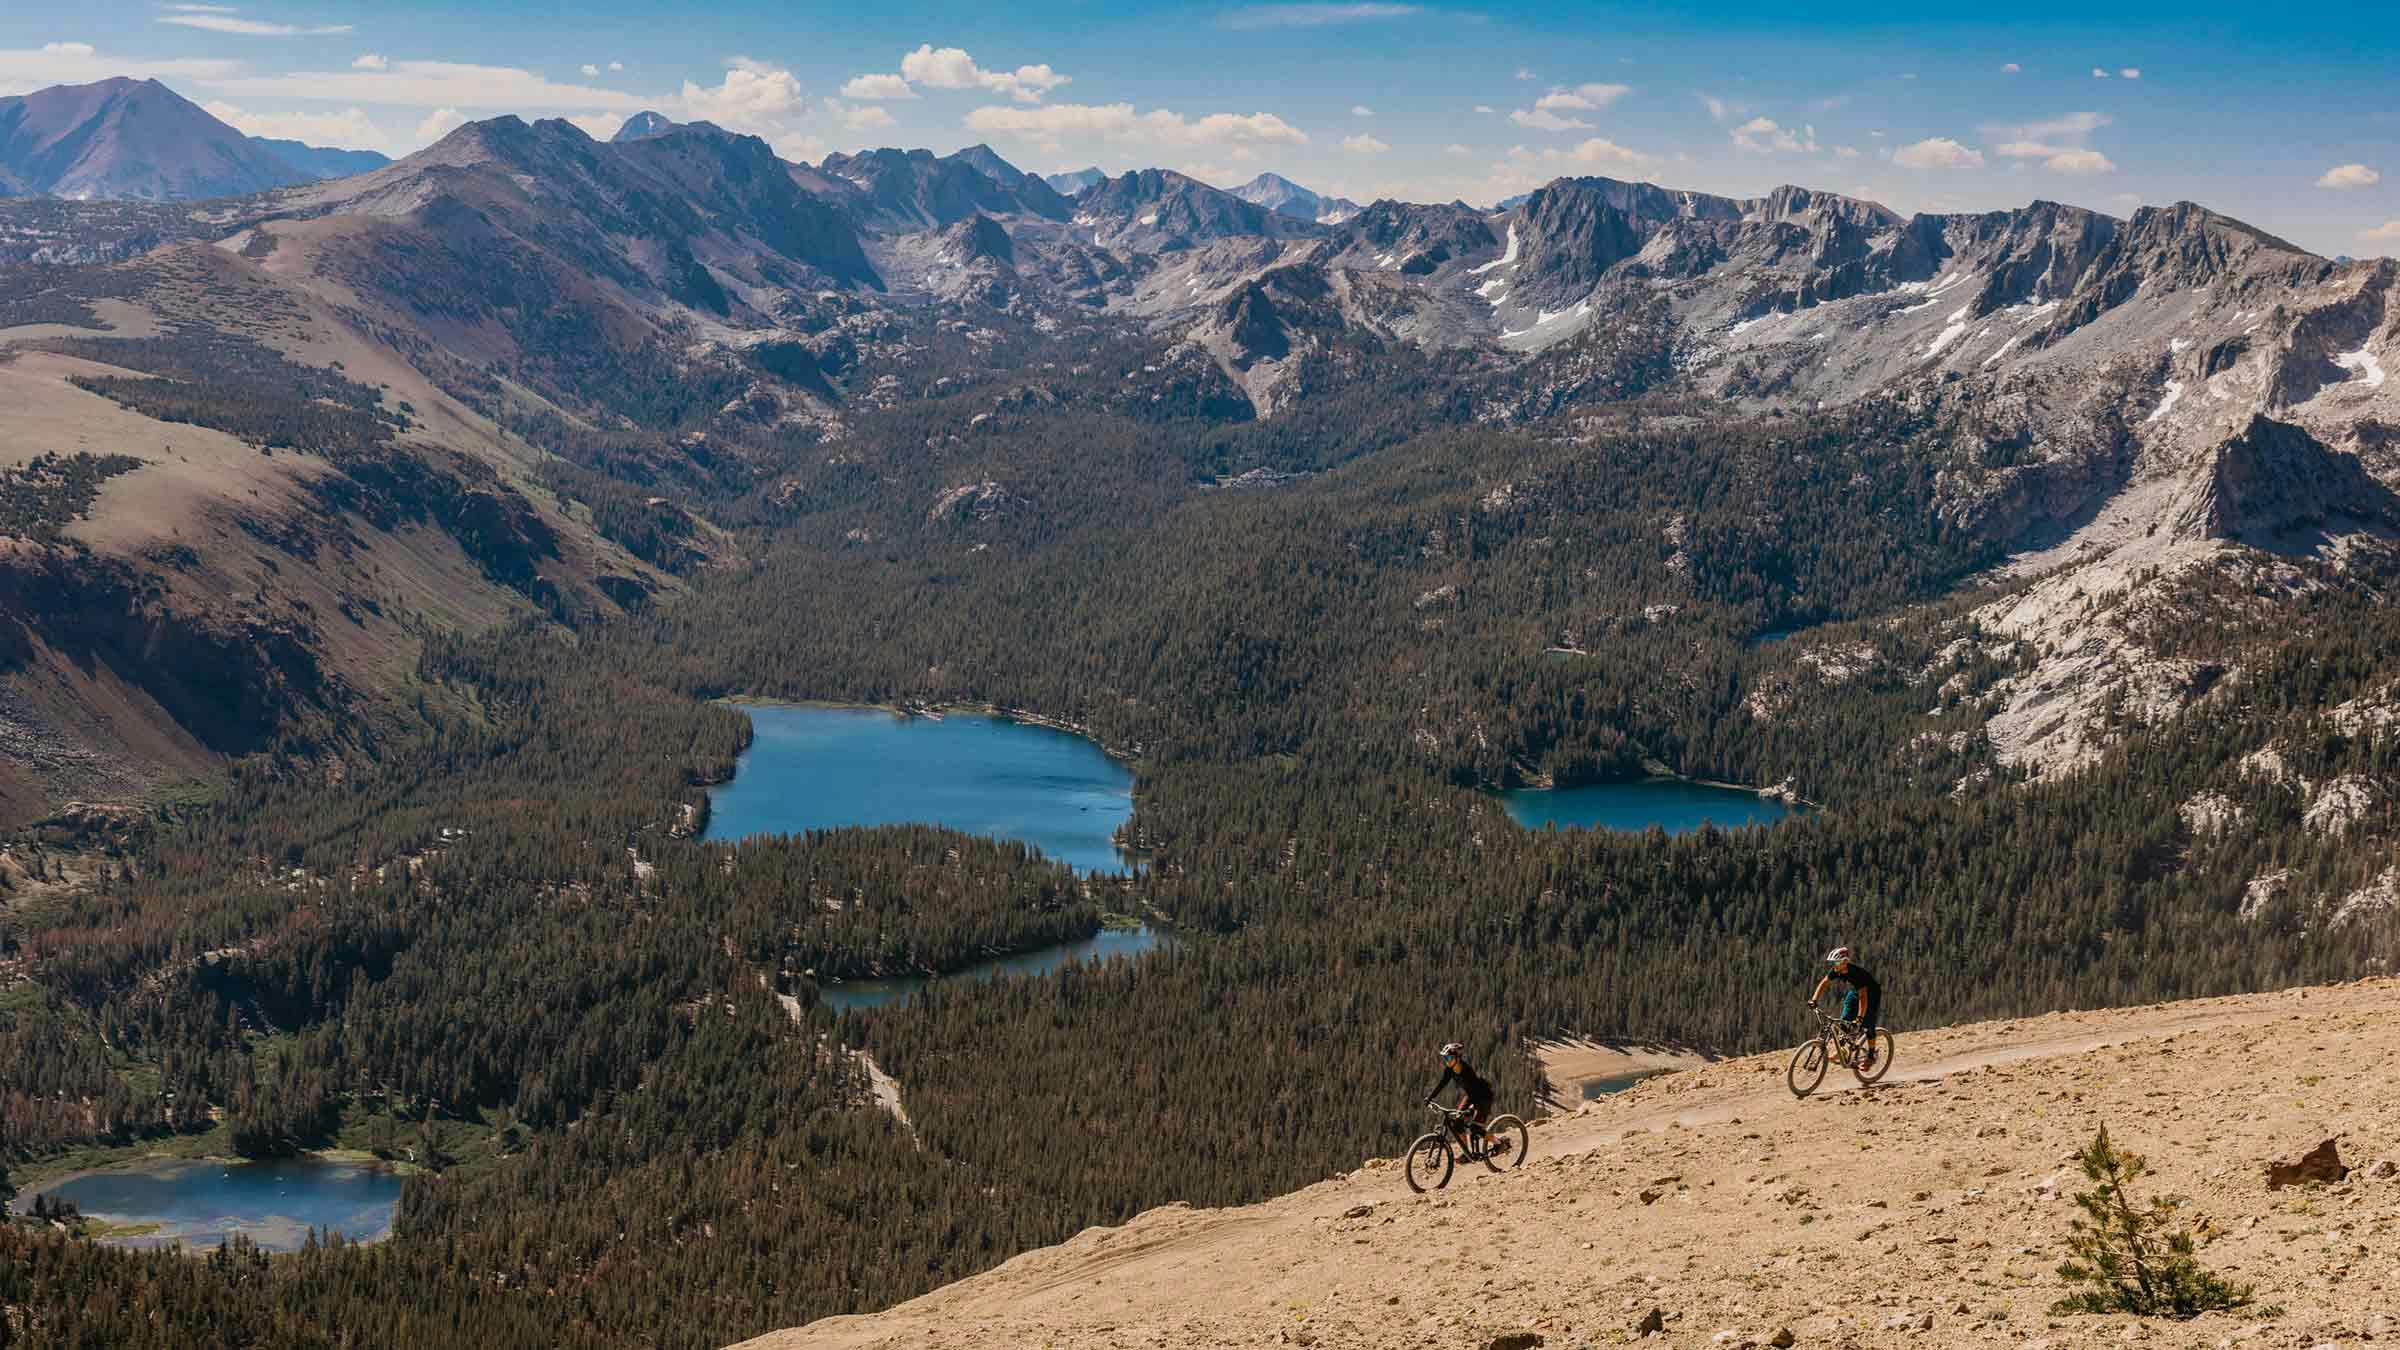 Two mountain bikers riding Off the Top with a view of the Lakes Basin.